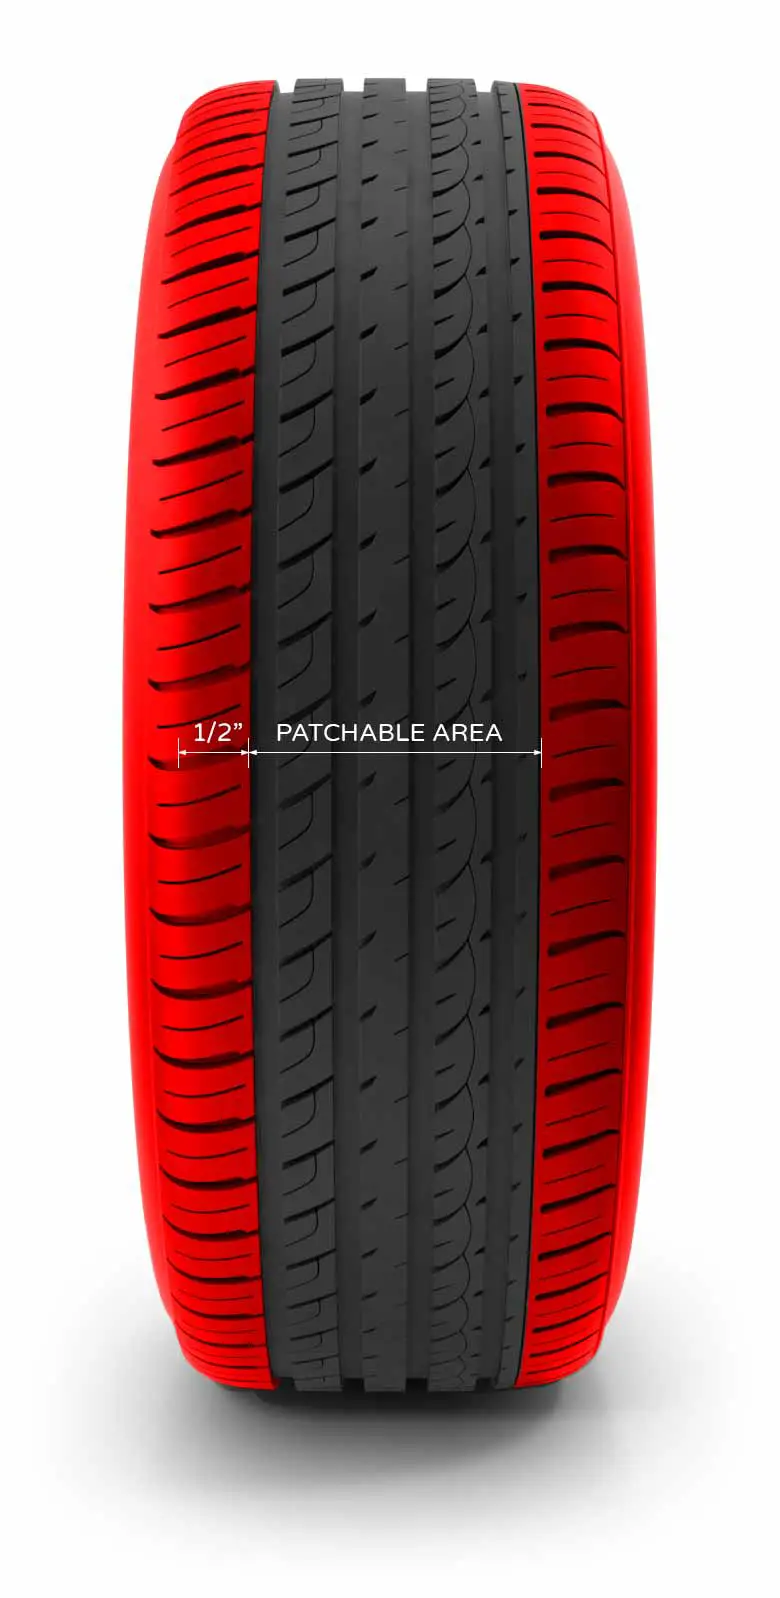 Area Of Tire Tread That Is Able To Be Patched